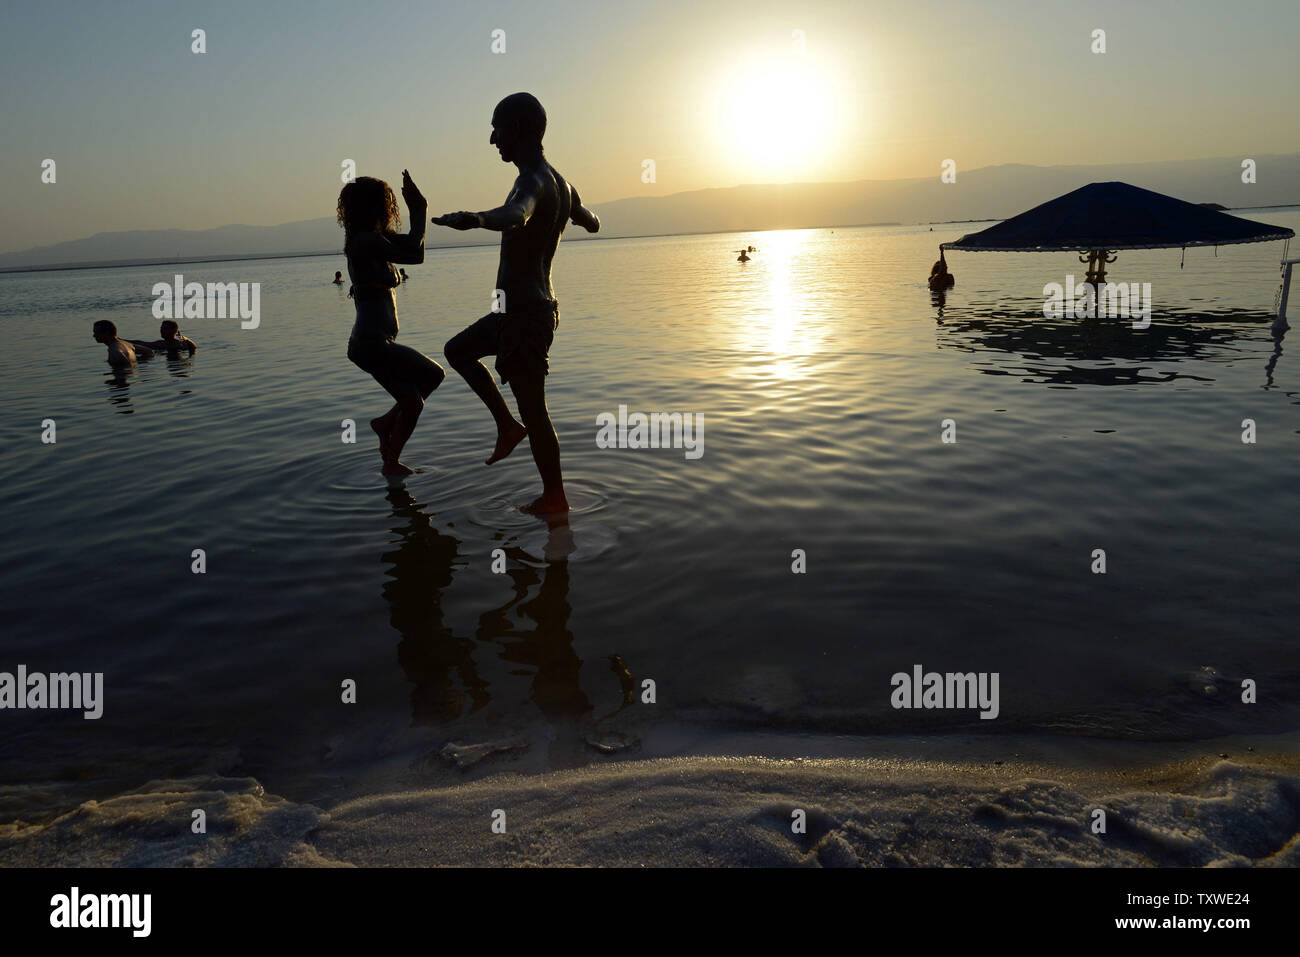 Israelis practice yoga poses on  salt crusts in the Dead Sea during an Israeli and international environmental and  social  protest float at dawn against the deterioration of the Dead Sea,  Ein Bokek, Israel, September 14, 2012.  The  event was organized by U.S. photographer Spencer Tunick.  UPI/Debbie Hill Stock Photo